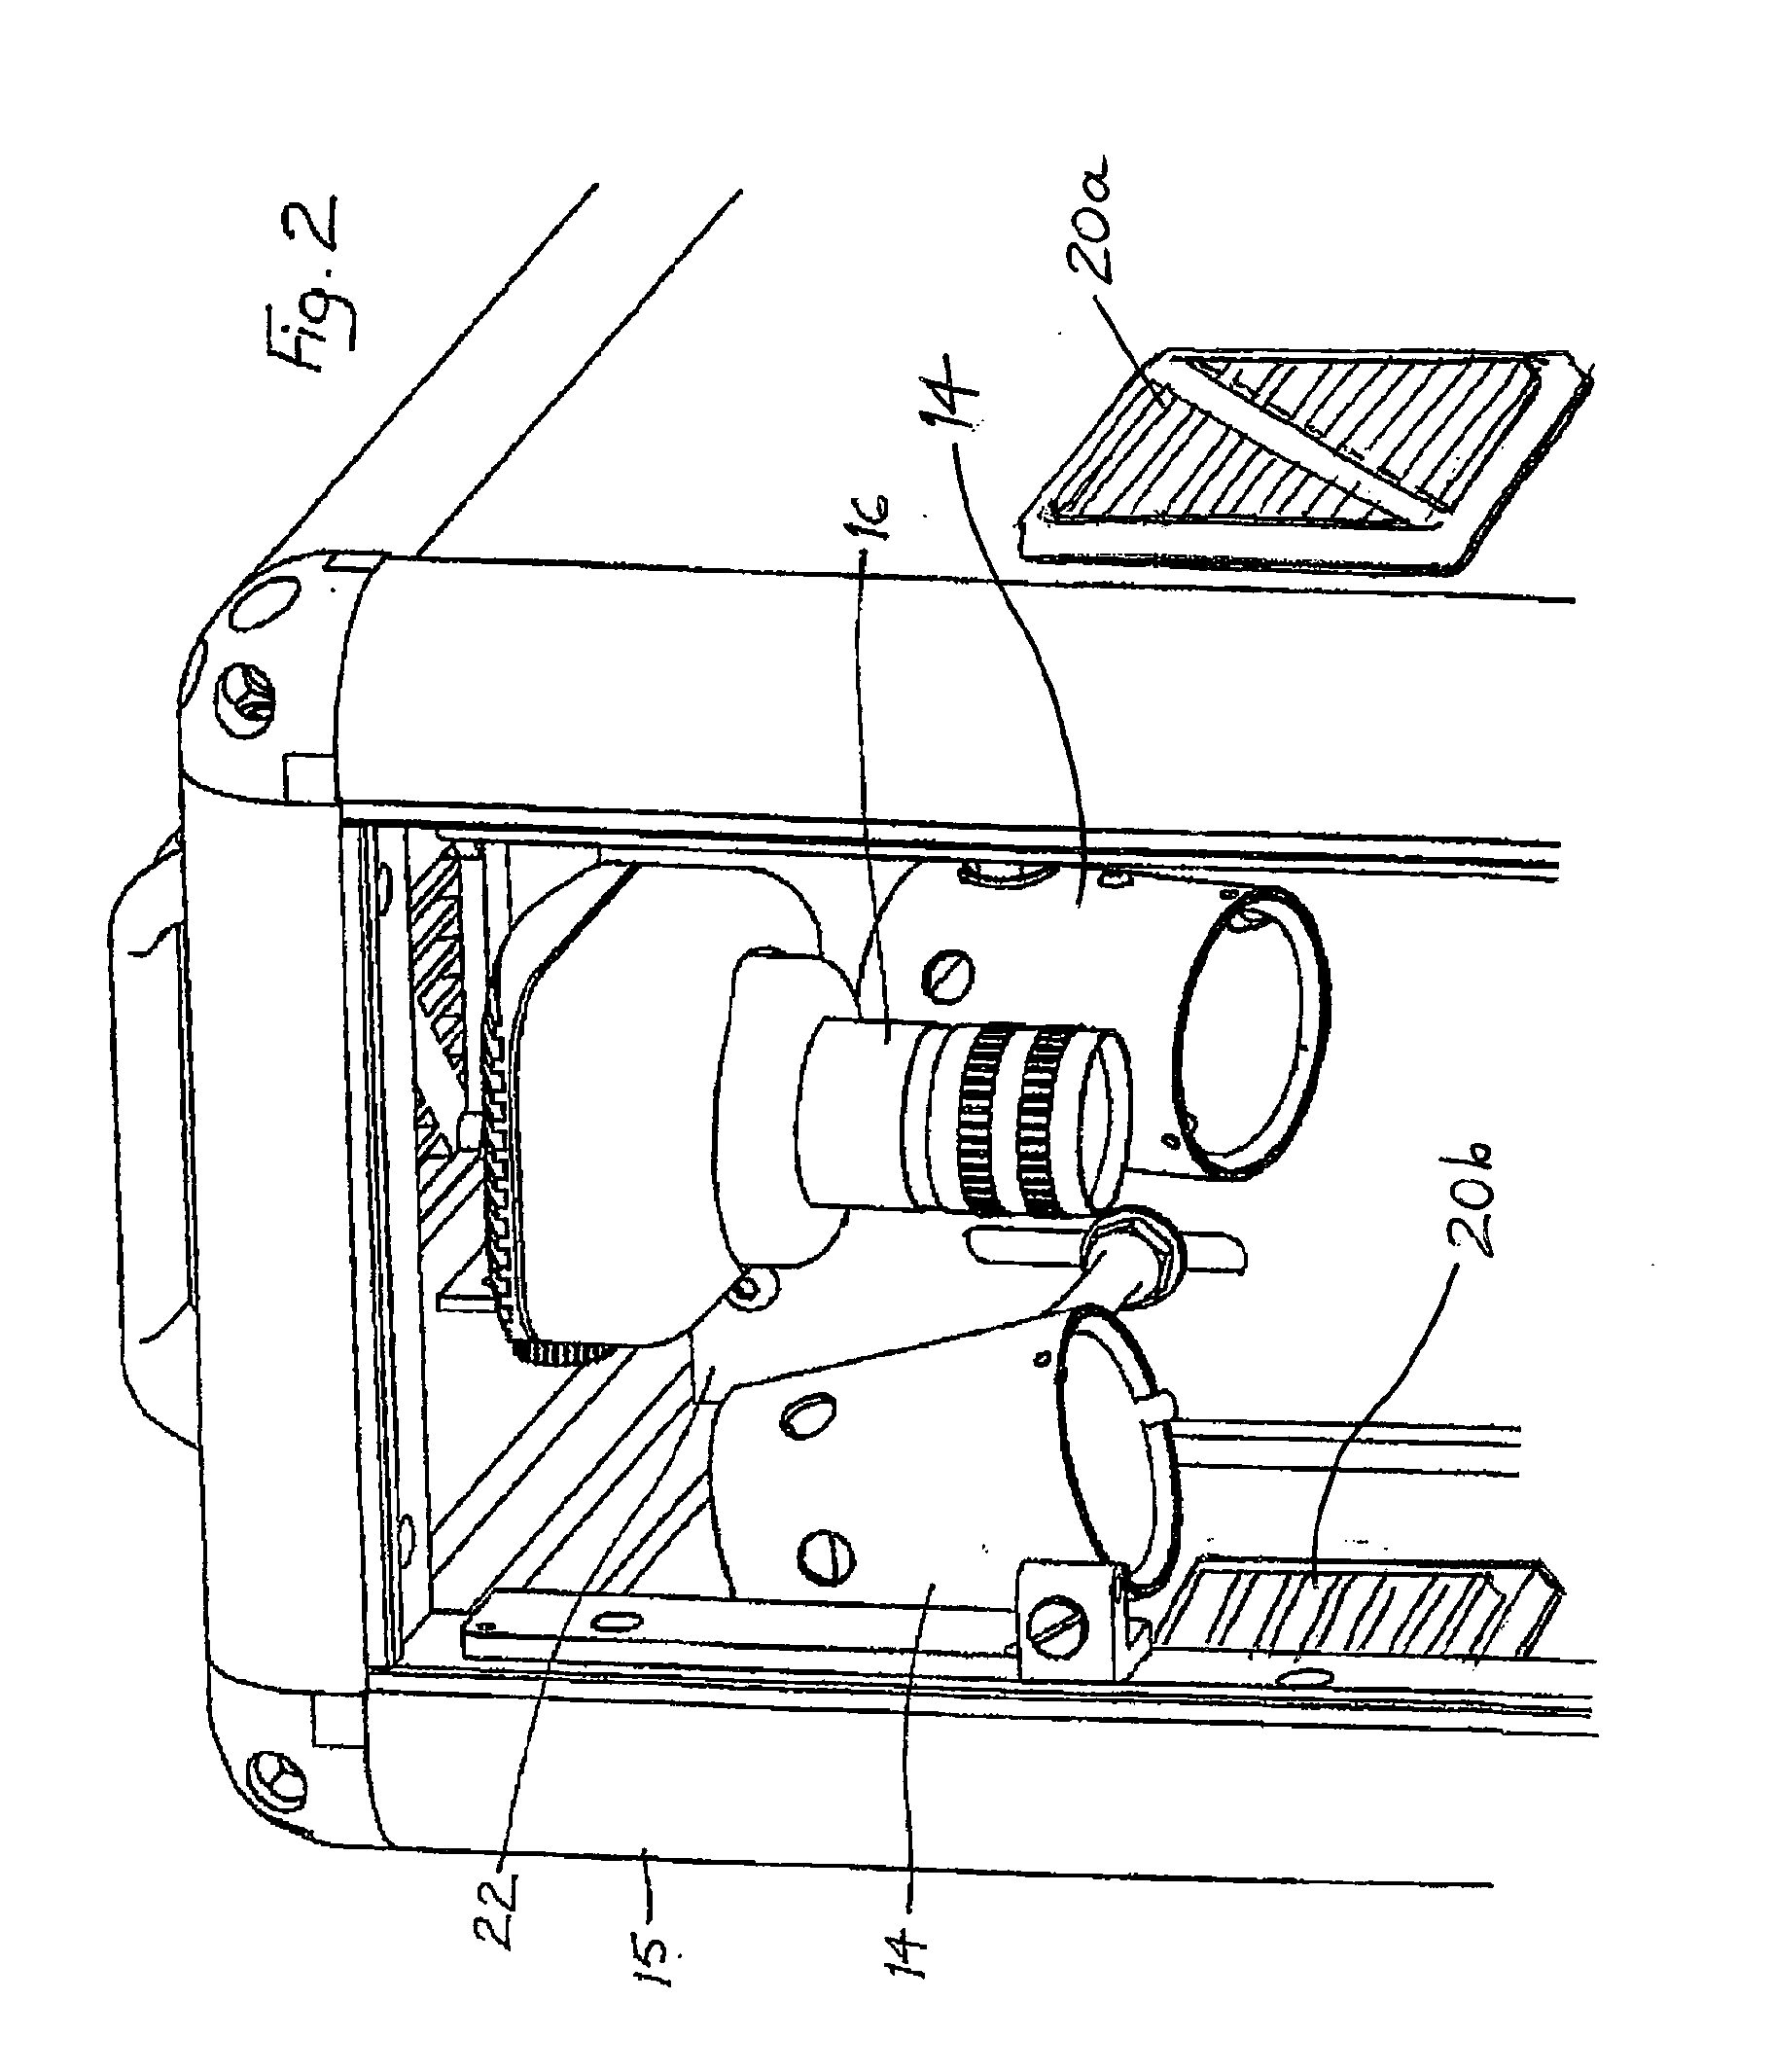 Modified apparatus and method for assessment, evaluation and grading of gemstones